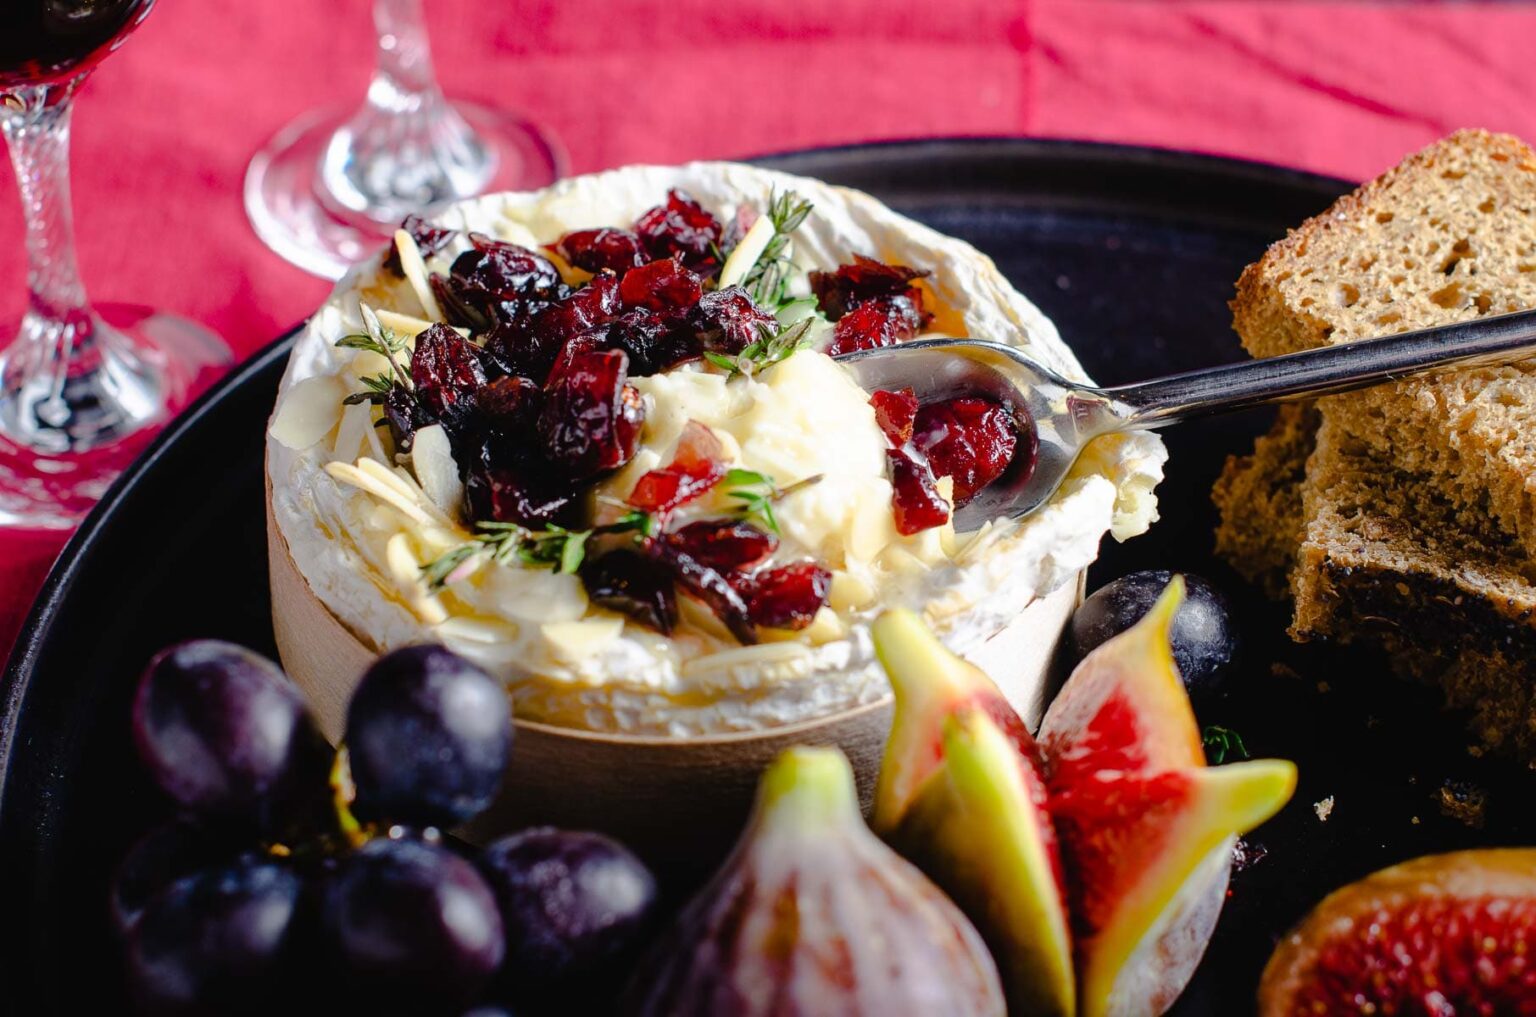 baked camembert toppings - Lost in Food